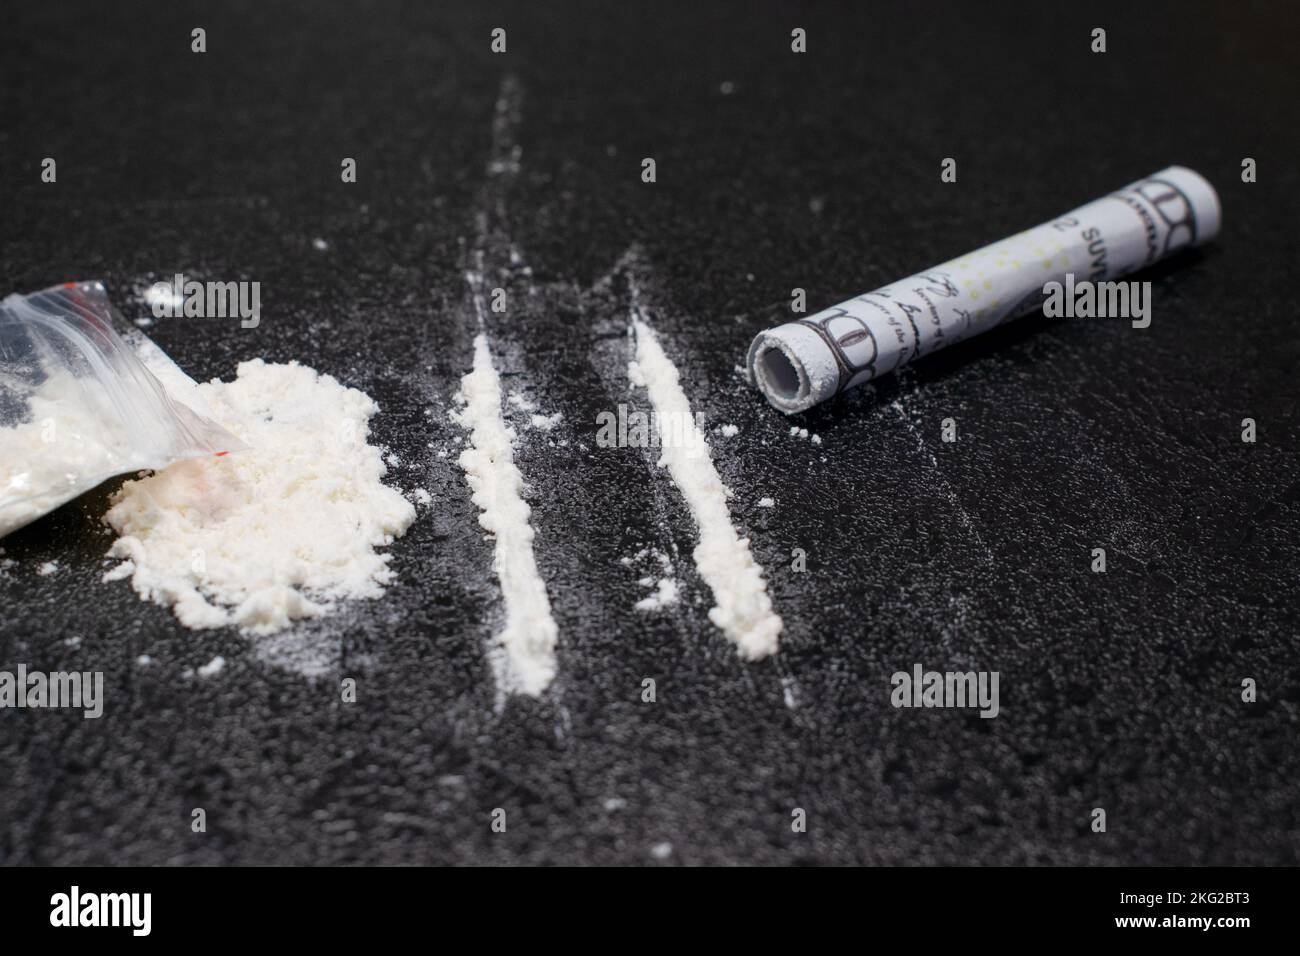 https://c8.alamy.com/comp/2KG2BT3/plastic-bag-two-lines-and-a-bunch-of-cocaine-with-a-breathing-tube-with-hundred-dollar-bill-on-a-black-background-closeup-2KG2BT3.jpg